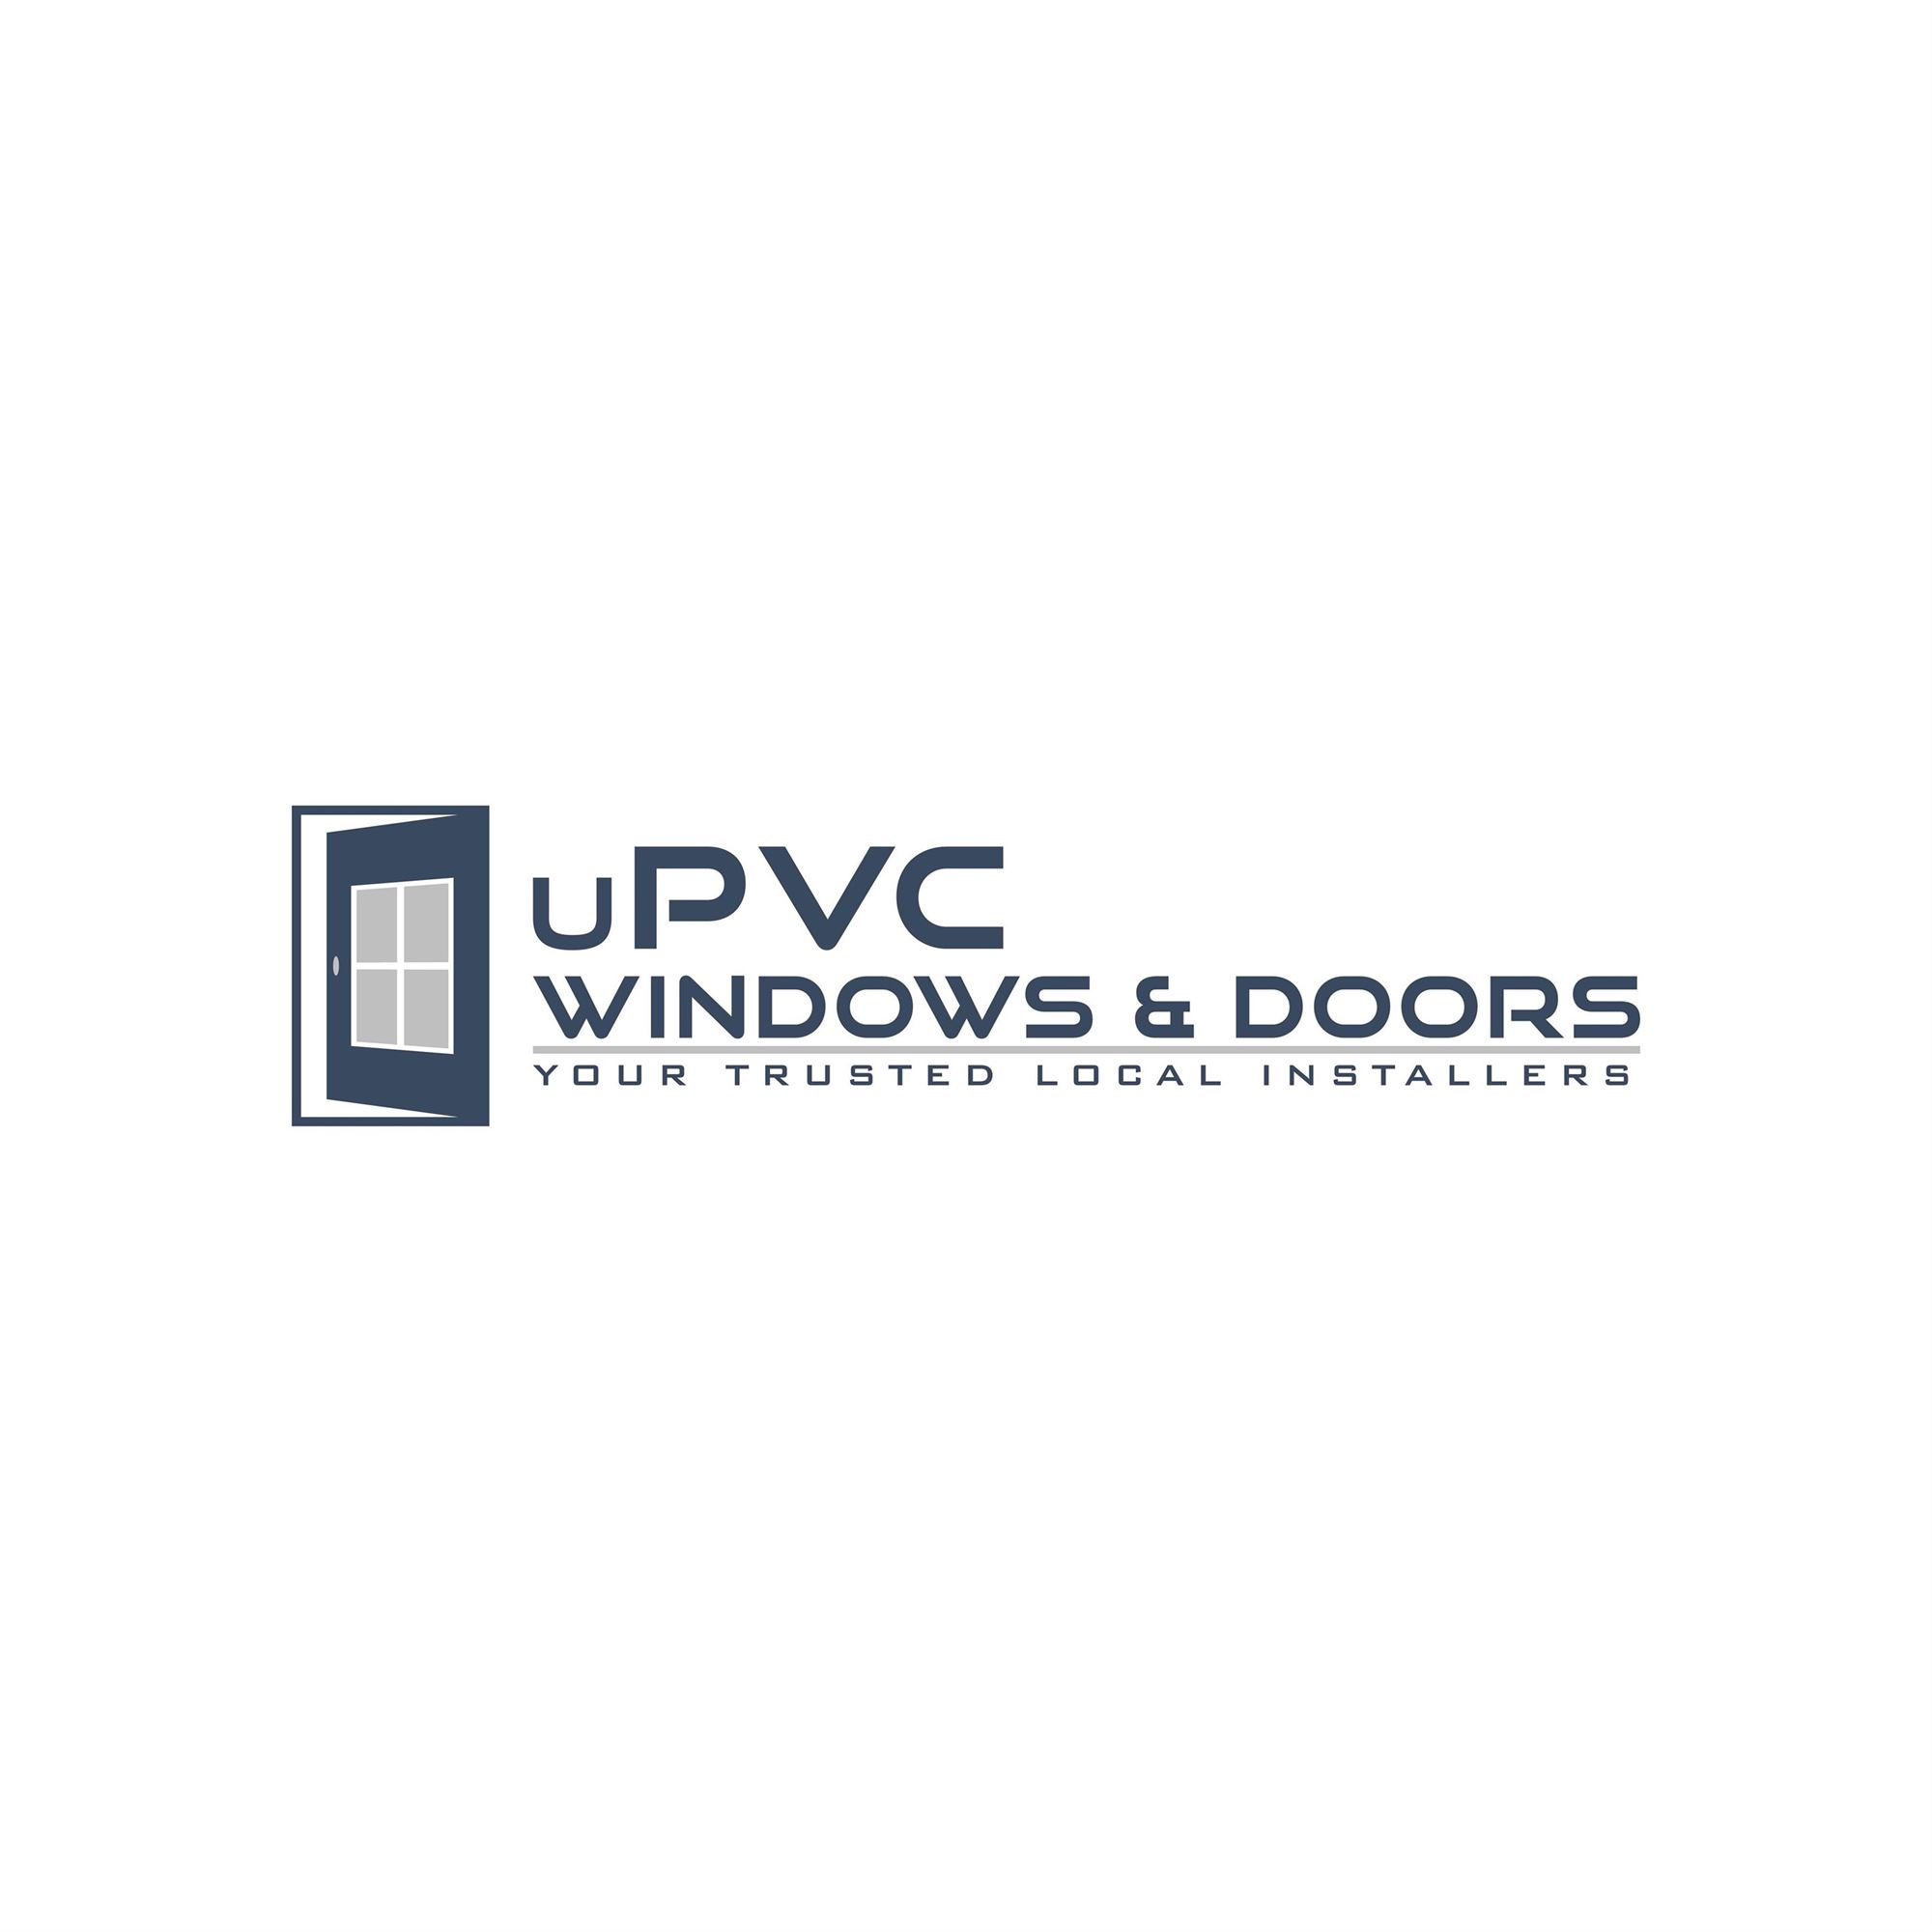 uPVC Windows & Doors Southampton Launches a New Website that will Aid Southampton Residents in Booking and Accessing its Services